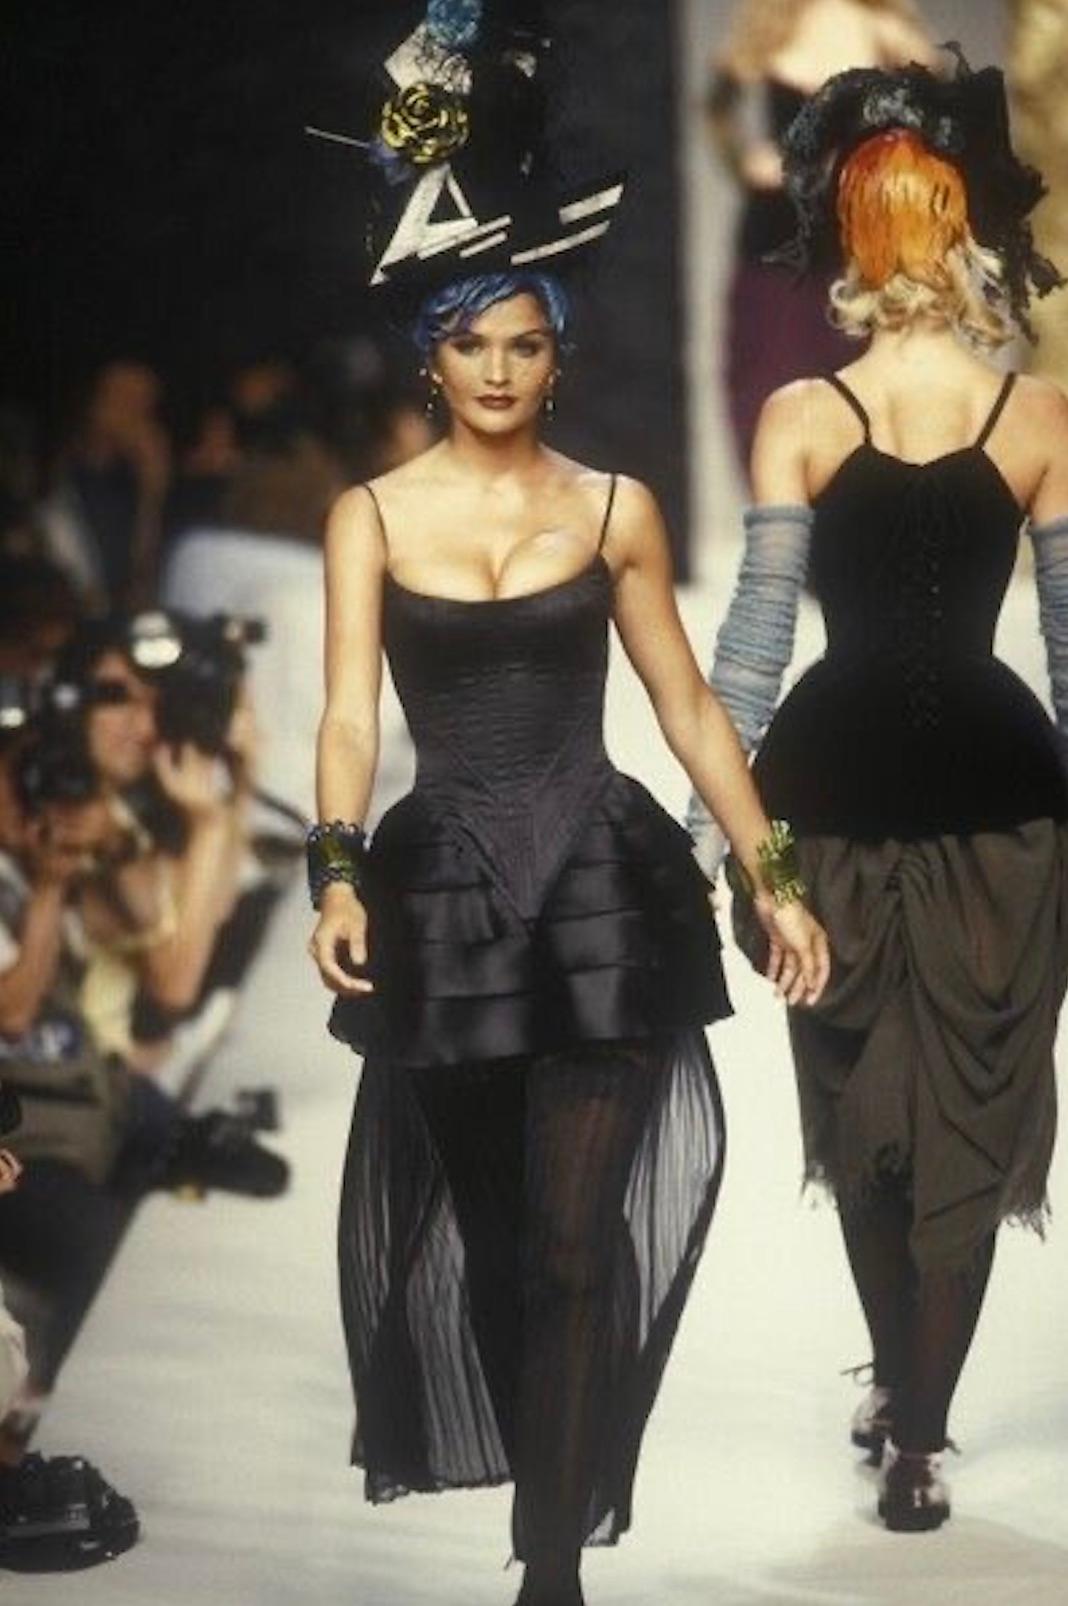 The Chanel Haute Couture Fall/Winter 1992 collection showcased an extraordinary 